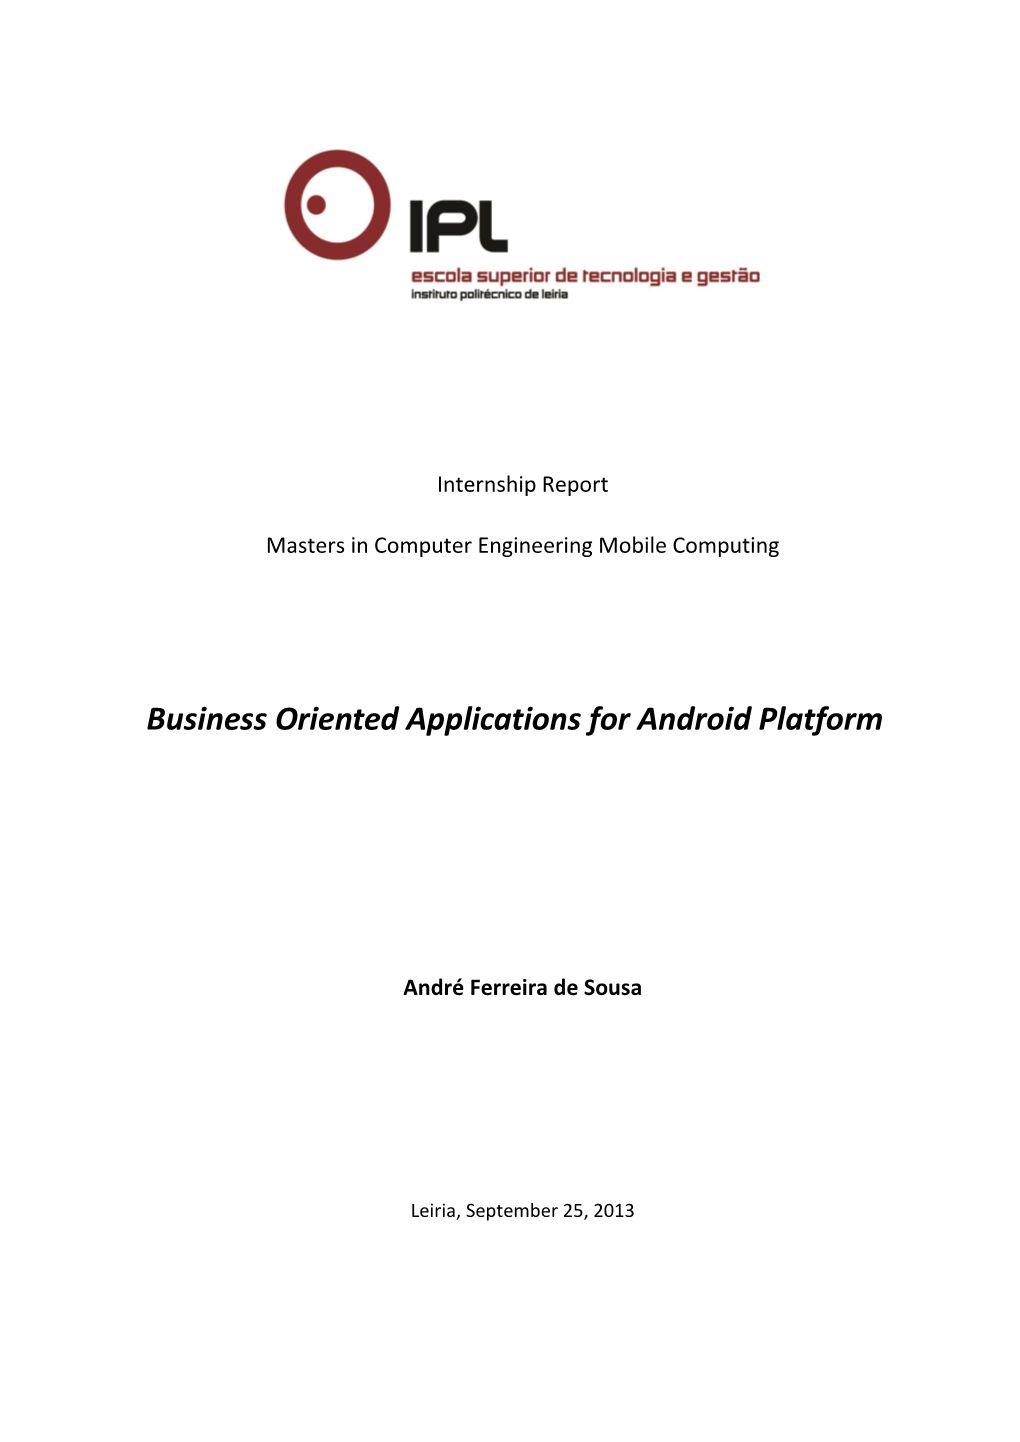 Business Oriented Applications for Android Platform